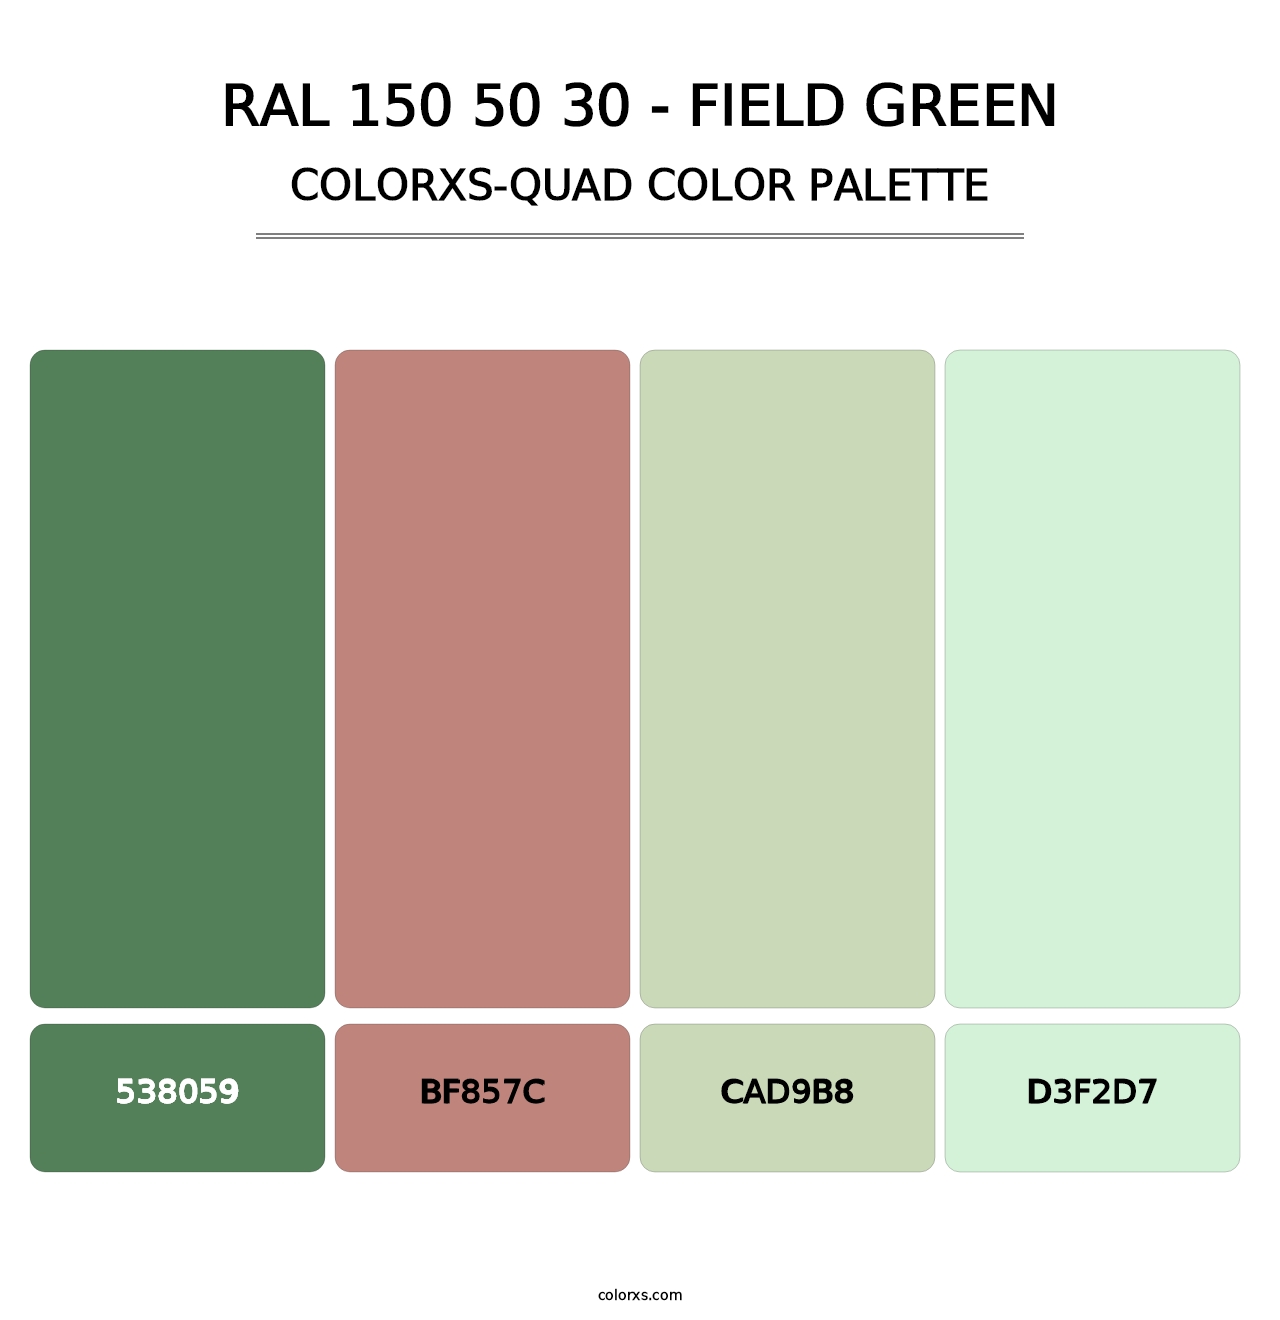 RAL 150 50 30 - Field Green - Colorxs Quad Palette